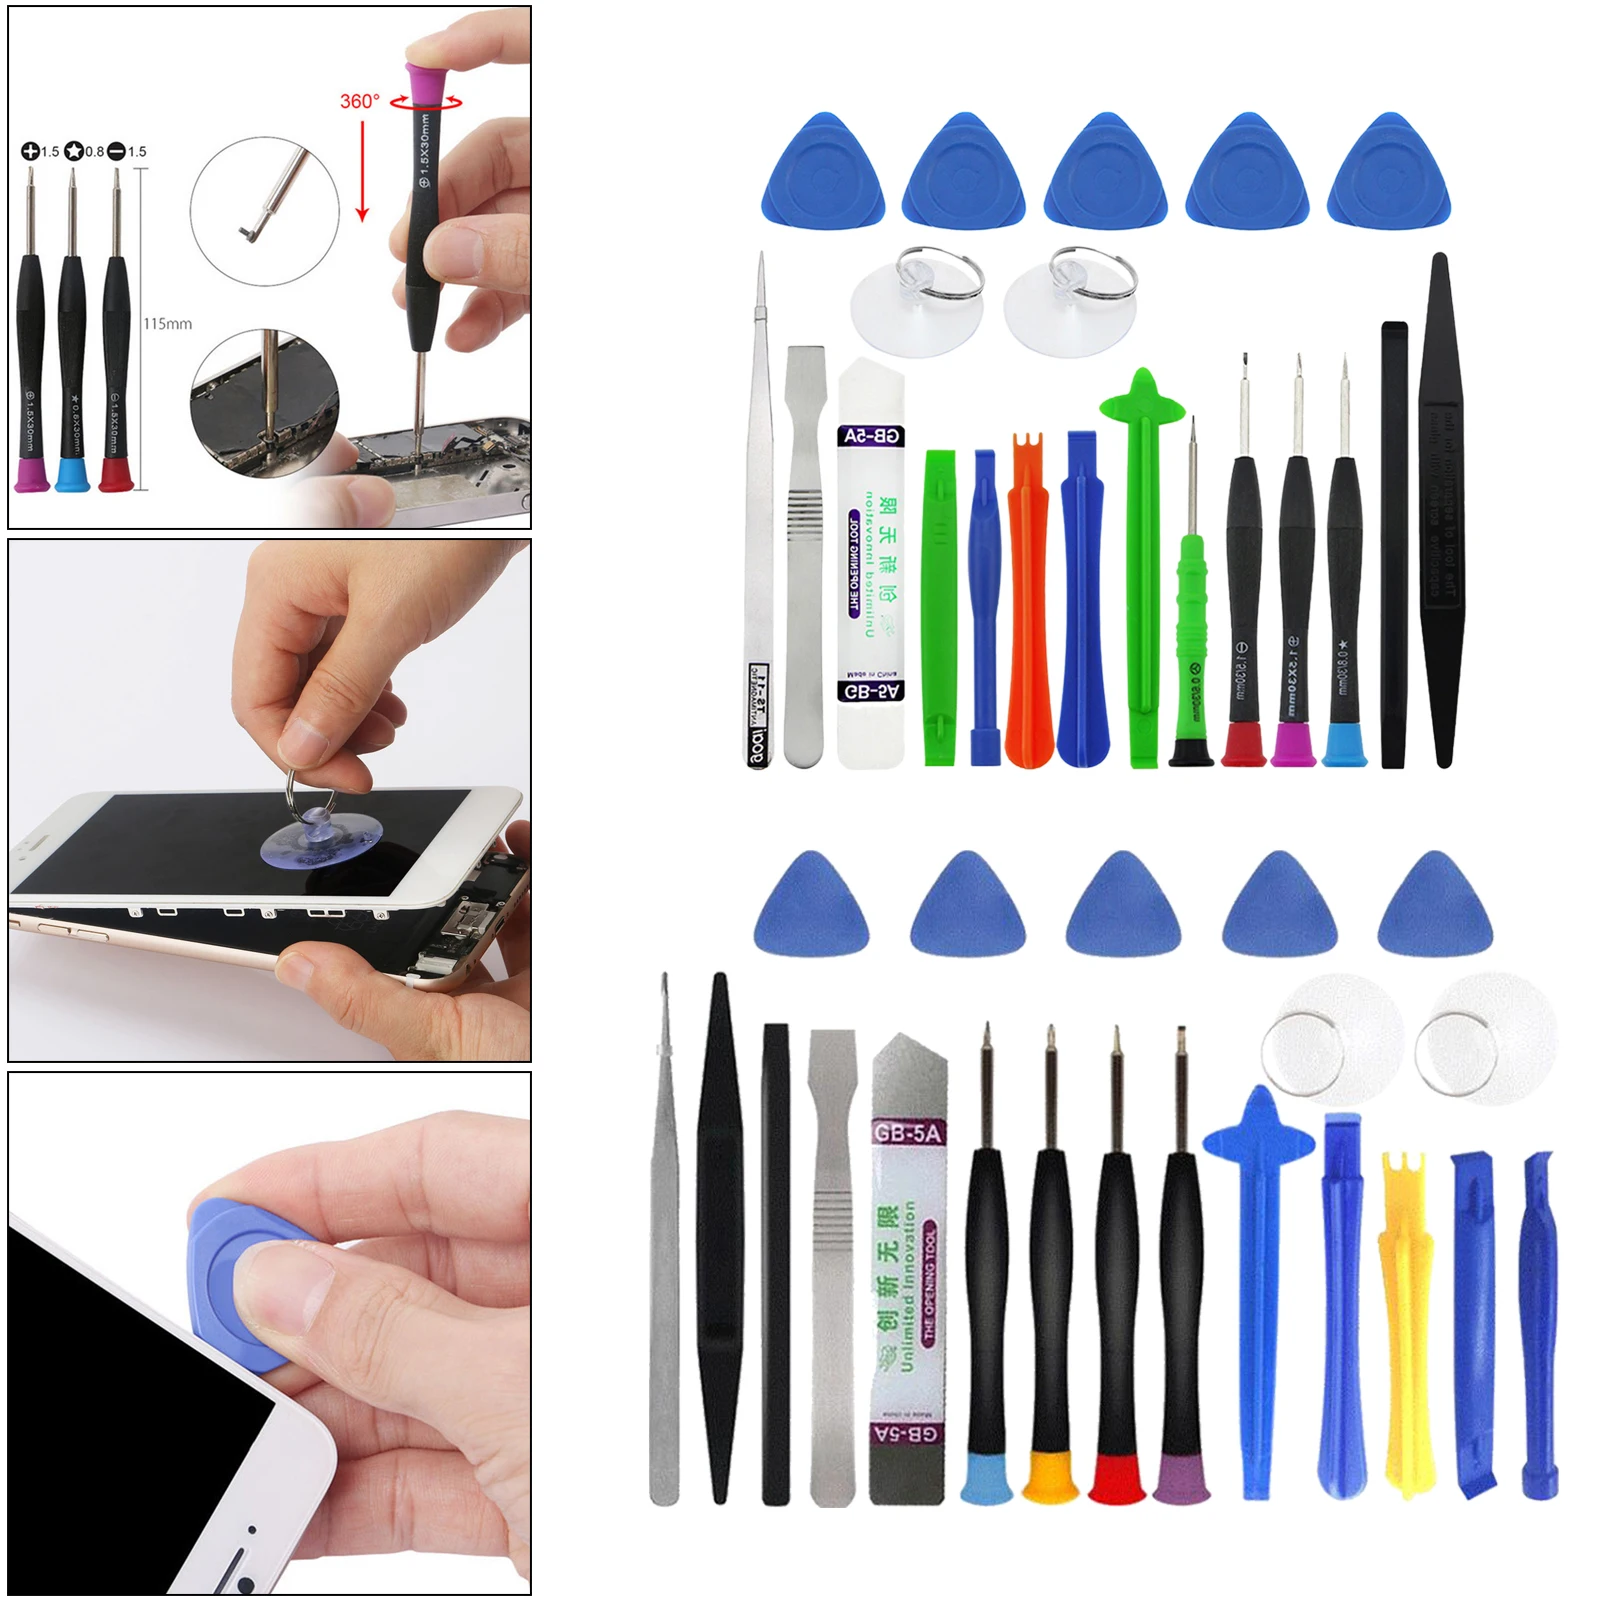 Professional Electronics Opening Pry Tool Kit with Metal Spudger Anti-Static Tweezers for Cellphone iPhone Laptops and More